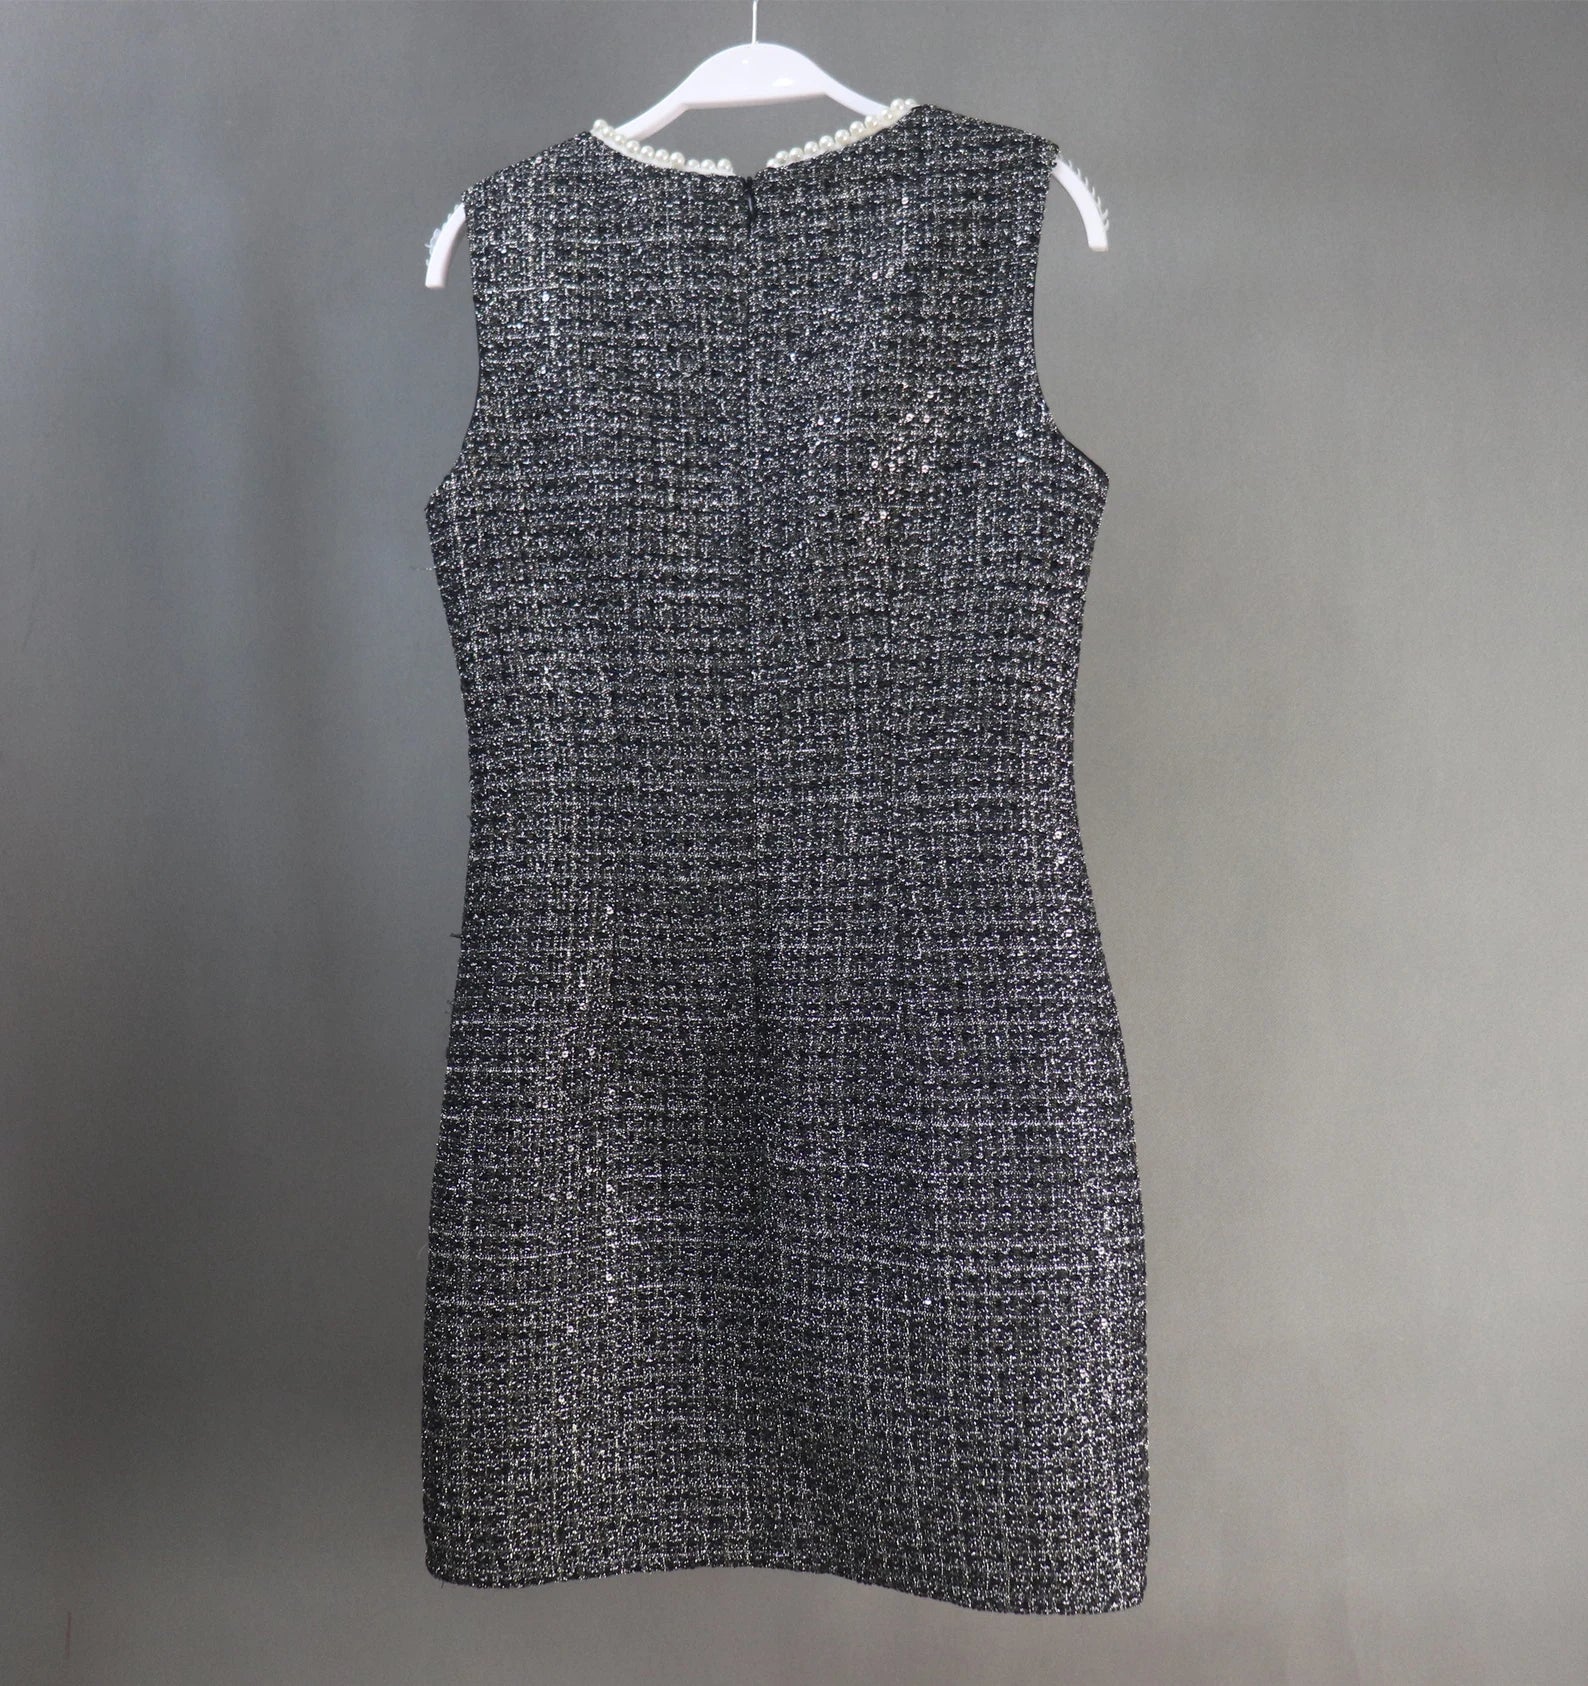 This dazzling FASHION Sequinned tweed little dress will stun everyone with its glamorous notes! This slim-fit black dress is made of a mid-weight tweed with dazzling lame accents, small sequins with white chiffon trims, and is lined with black satin. This dress also has a high neckline with trims, a sleeveless design,